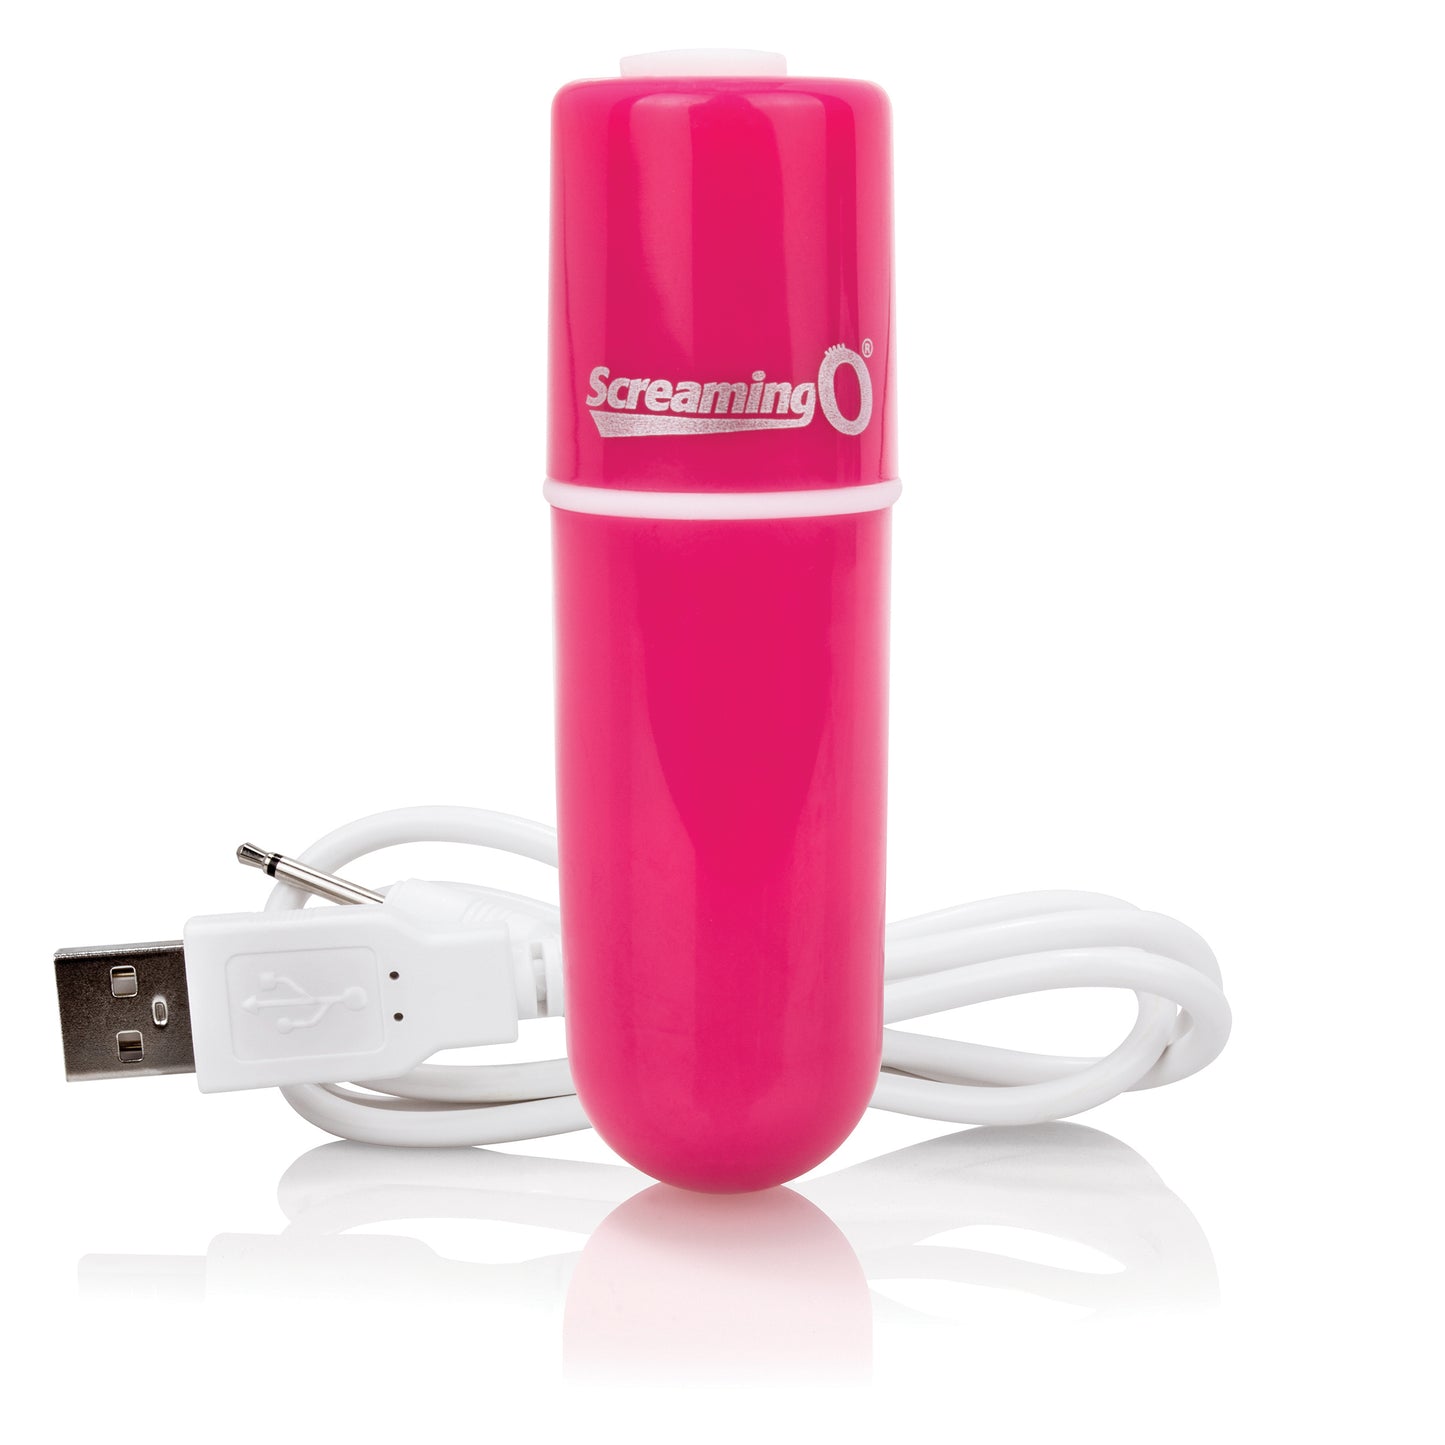 ScreamingO Charged Vooom Rechargeable Bullet Vibe